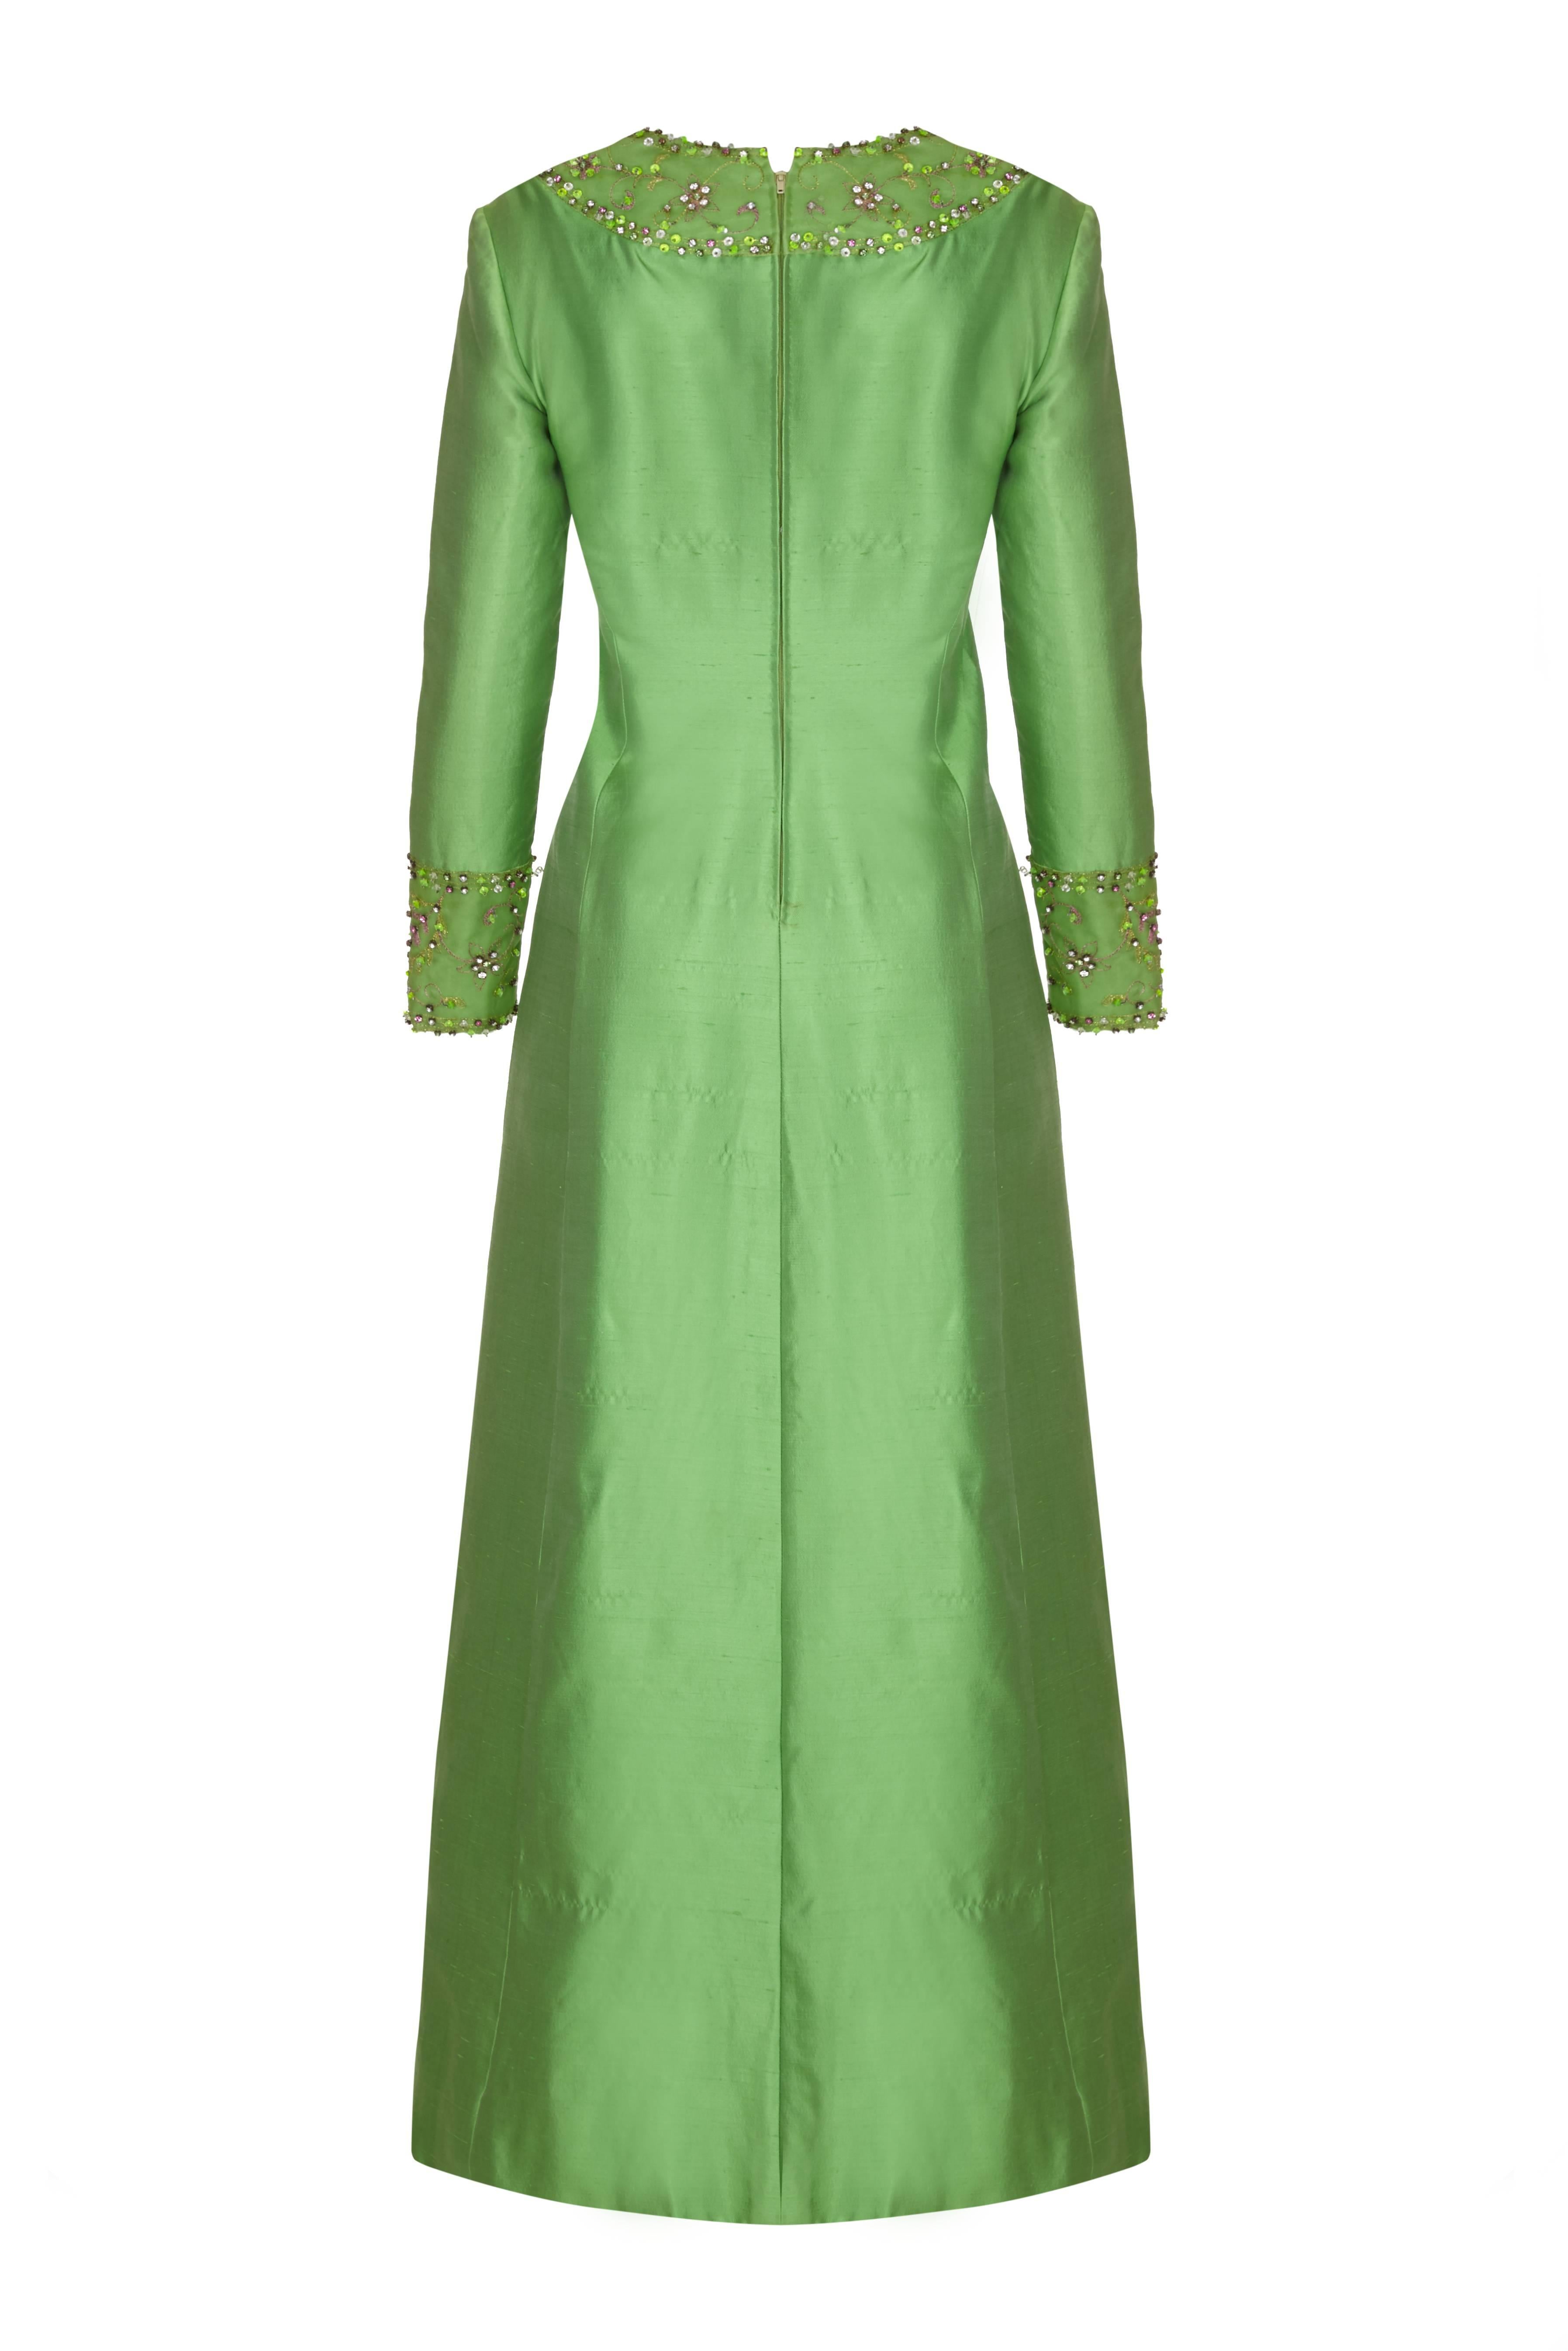 This striking full length silk blend vintage dress in neon green is by American label Gino Charles for Malcolm Starr and is of superb quality.  Made in the late 1960s in Hong Hong, which at the time, was the centre of excellence globally for